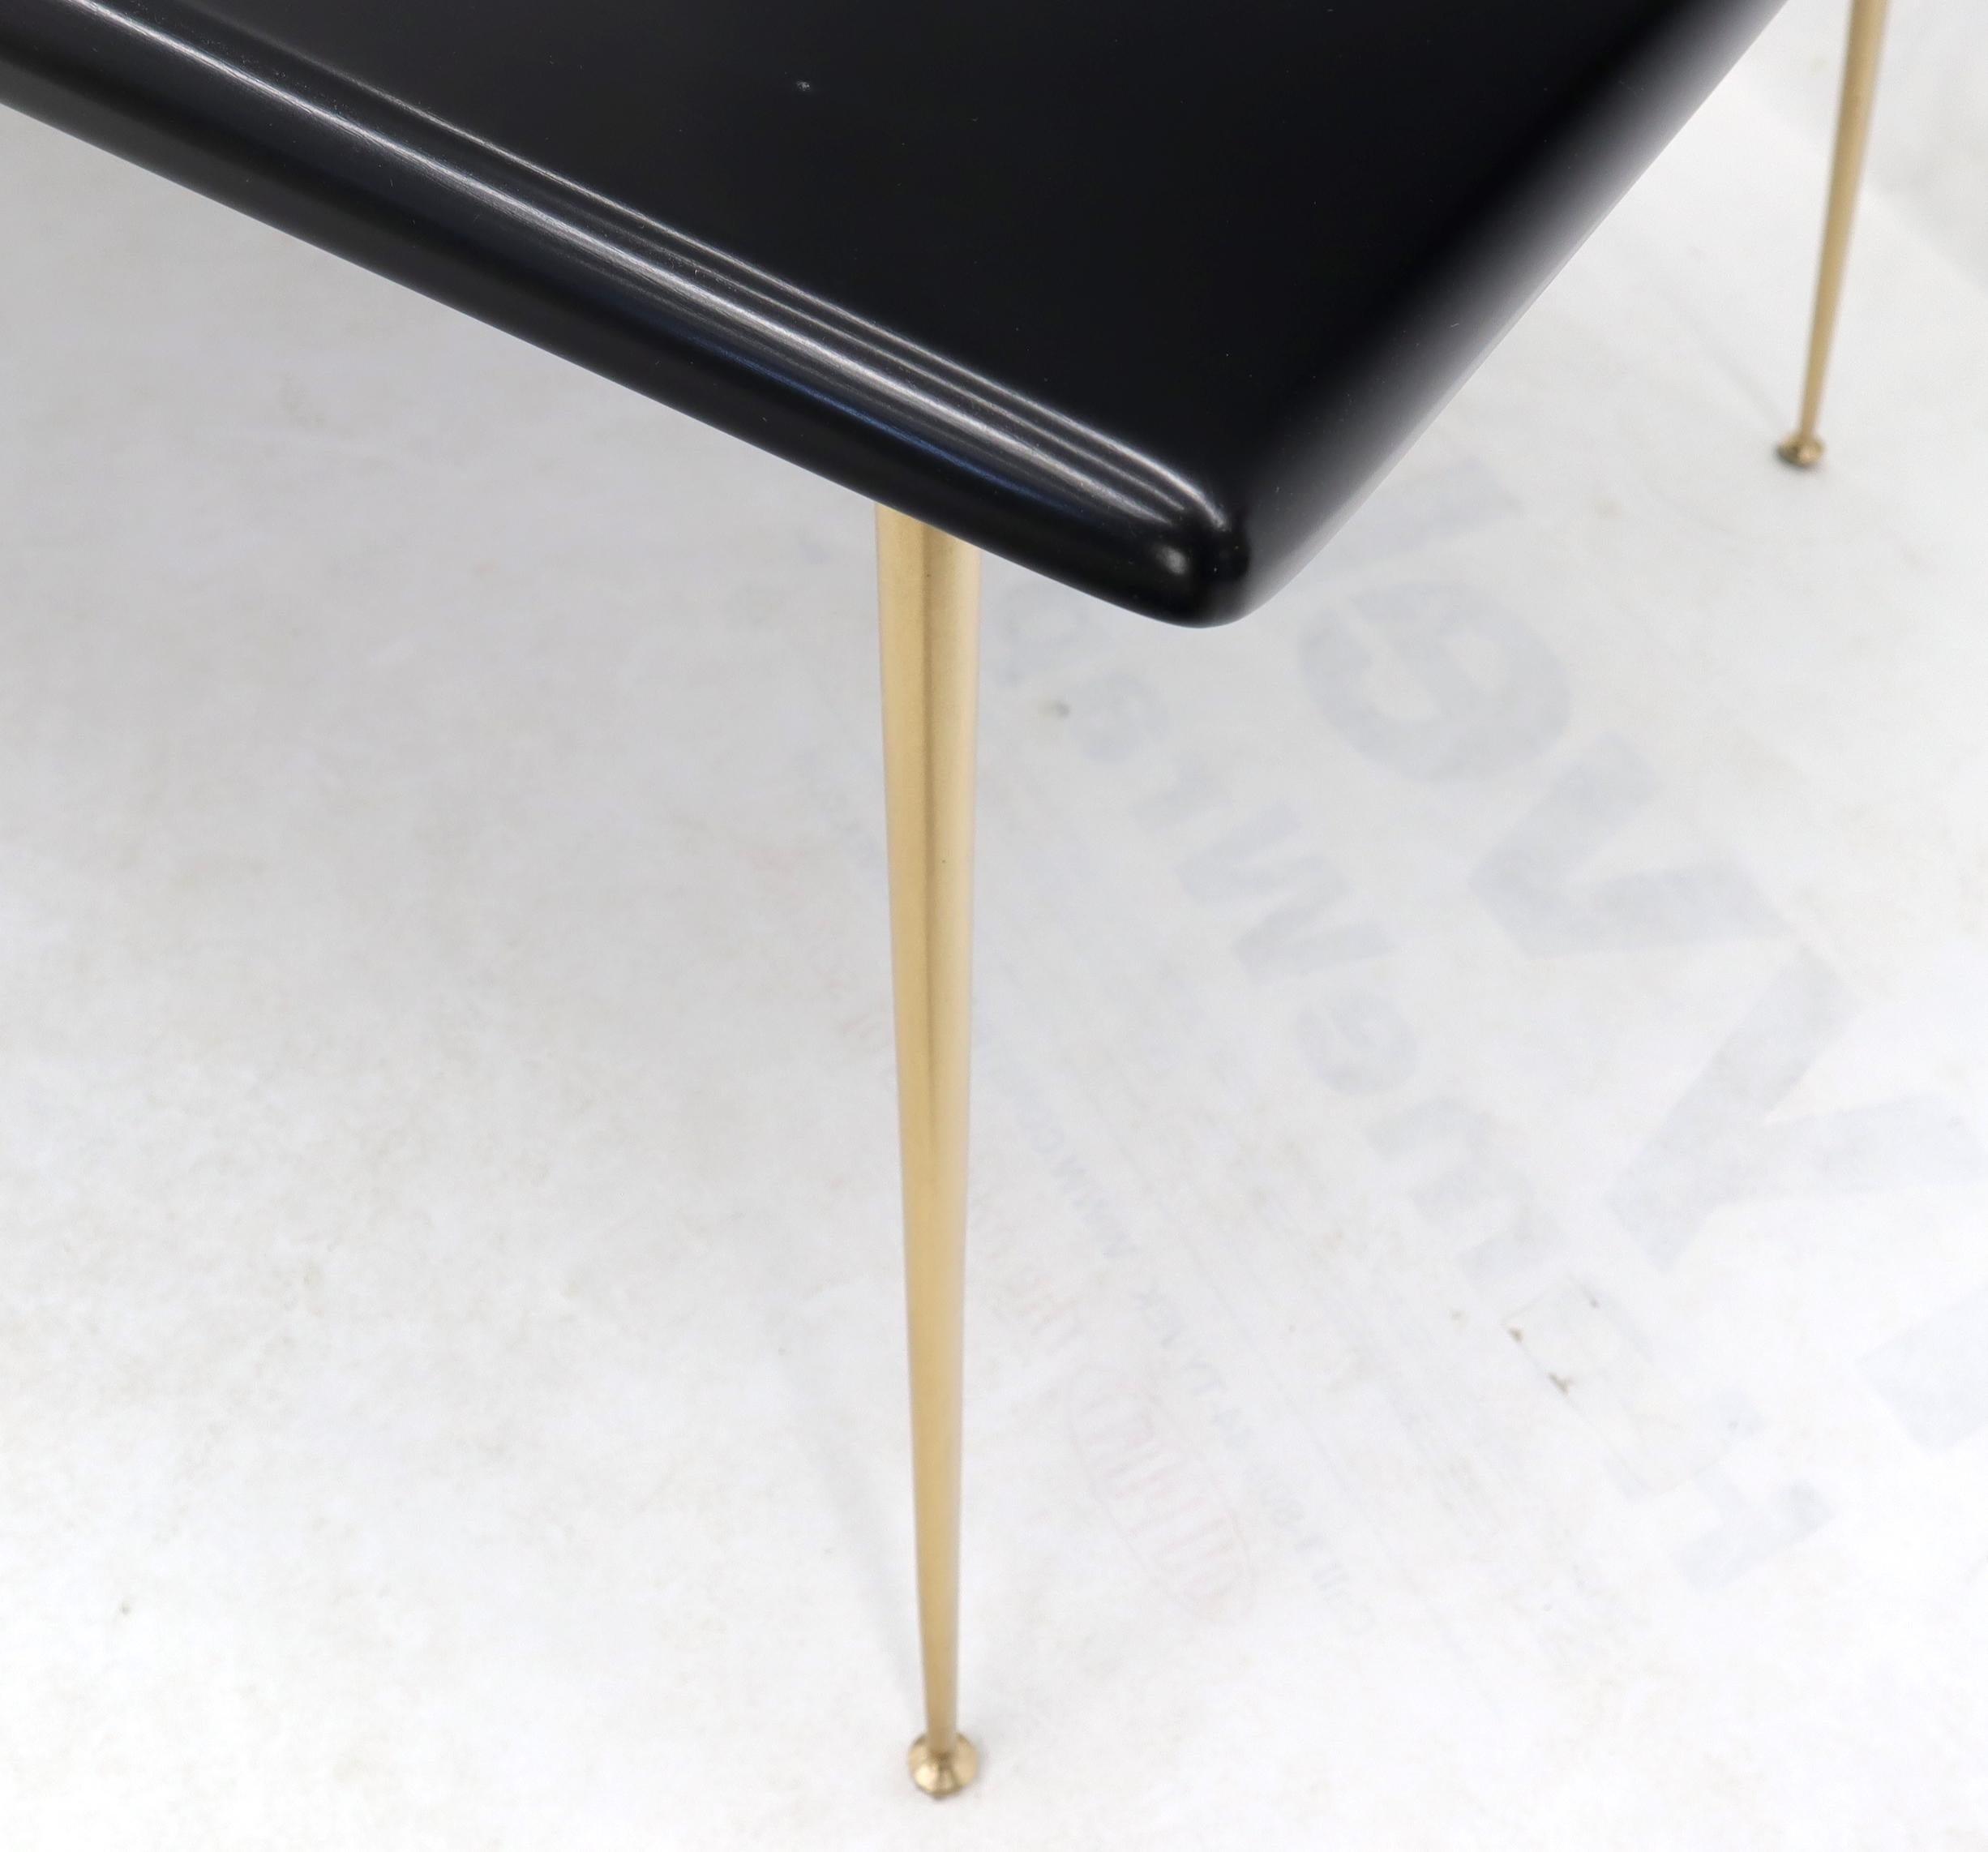 Black Lacquer Brass Legs Gibbings Dining Table with 1 Extensions Board For Sale 5